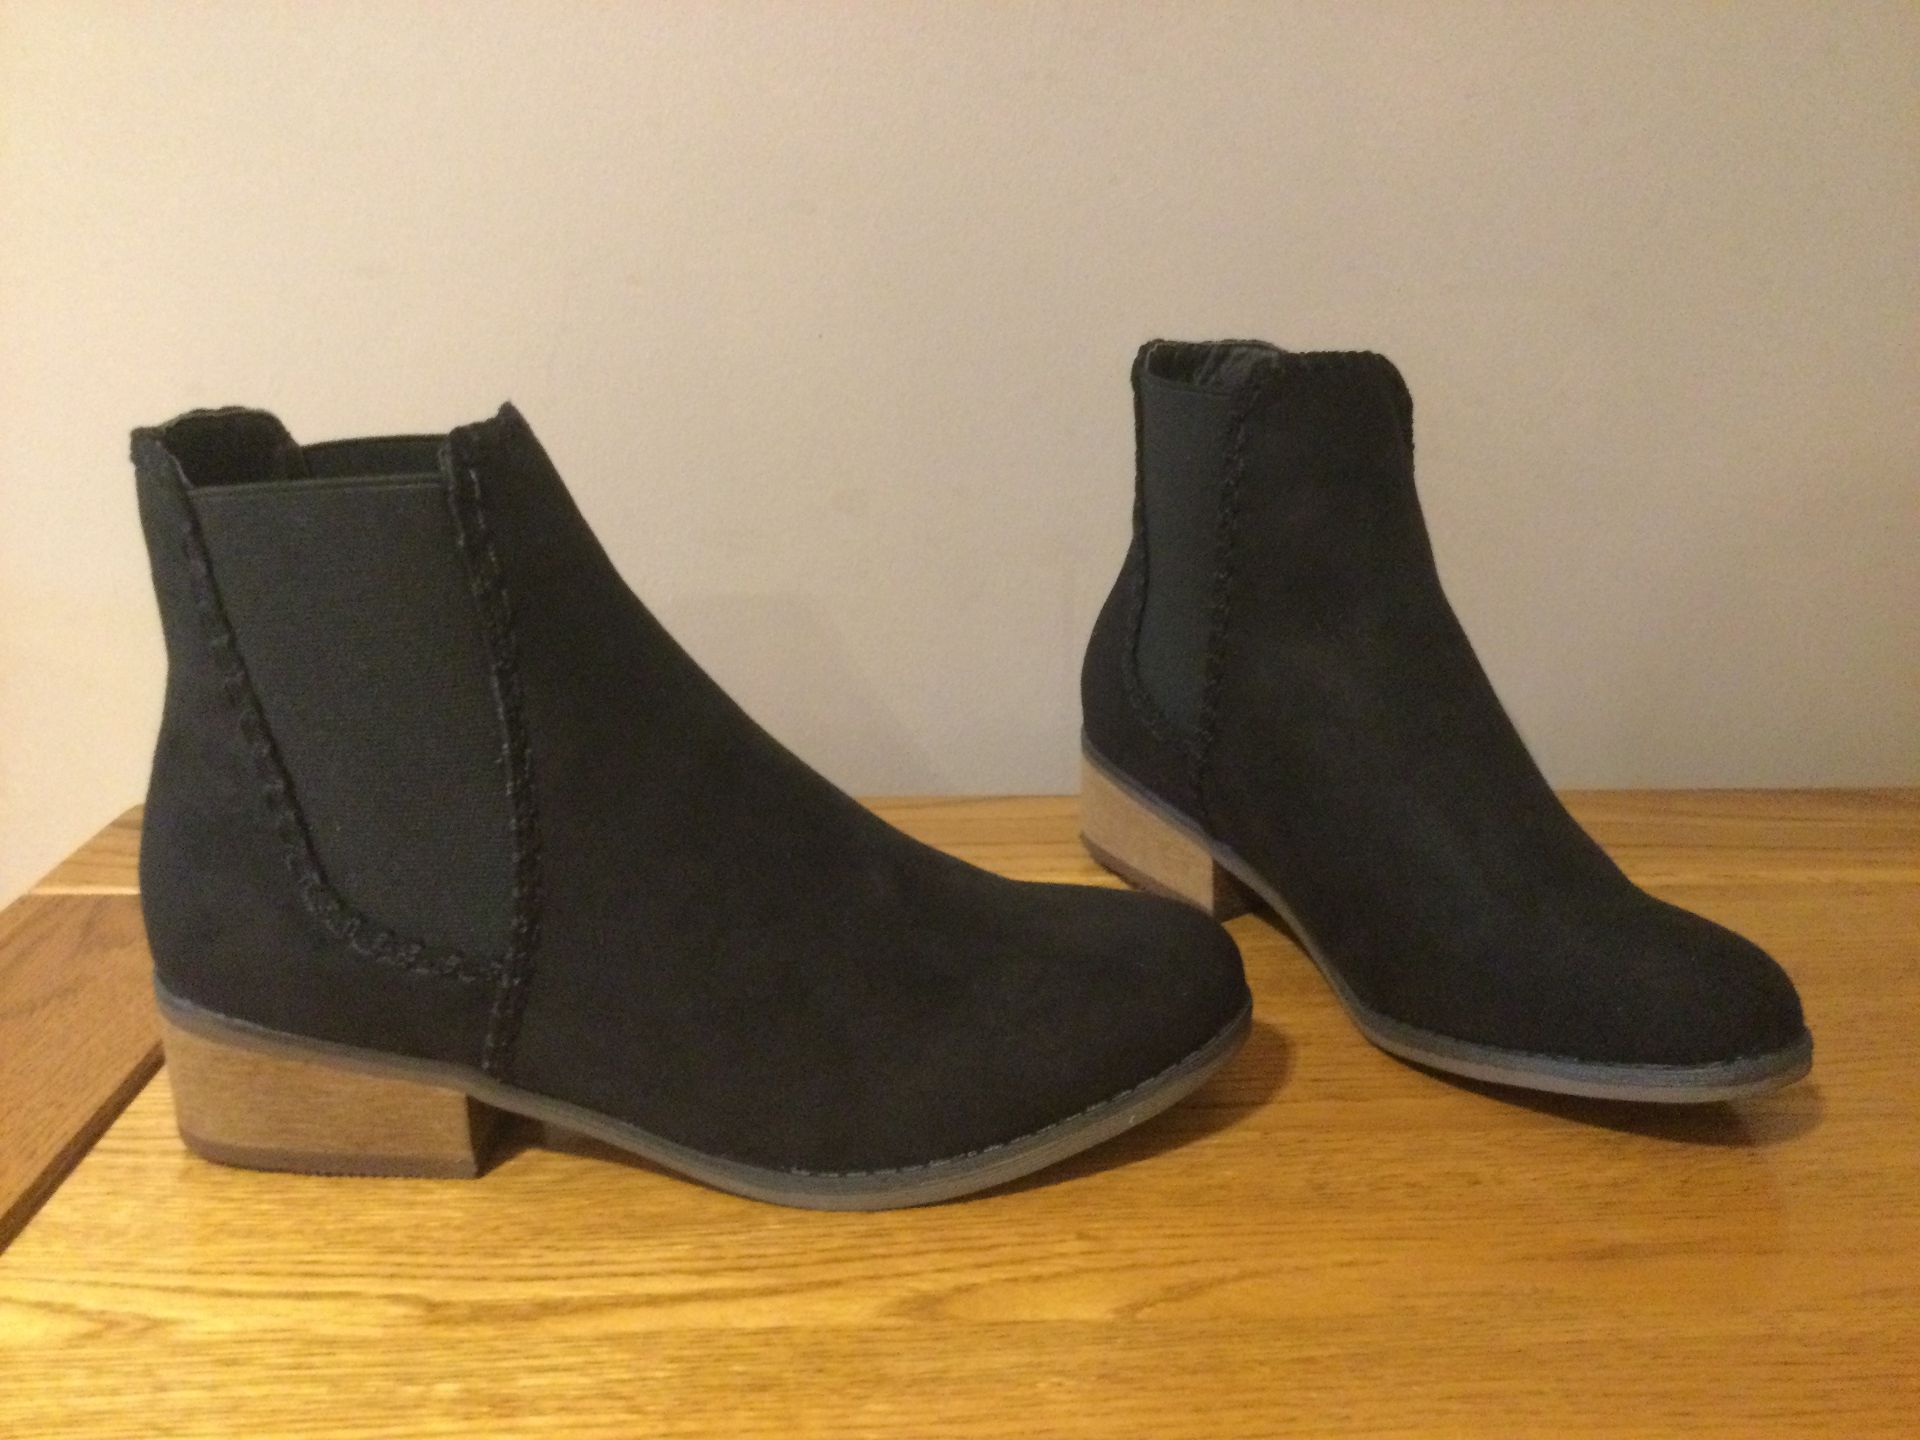 Dolcis “Pasha” Low Heel Ankle Boots, Size 5, Black - New RRP £45.99 - Image 3 of 6